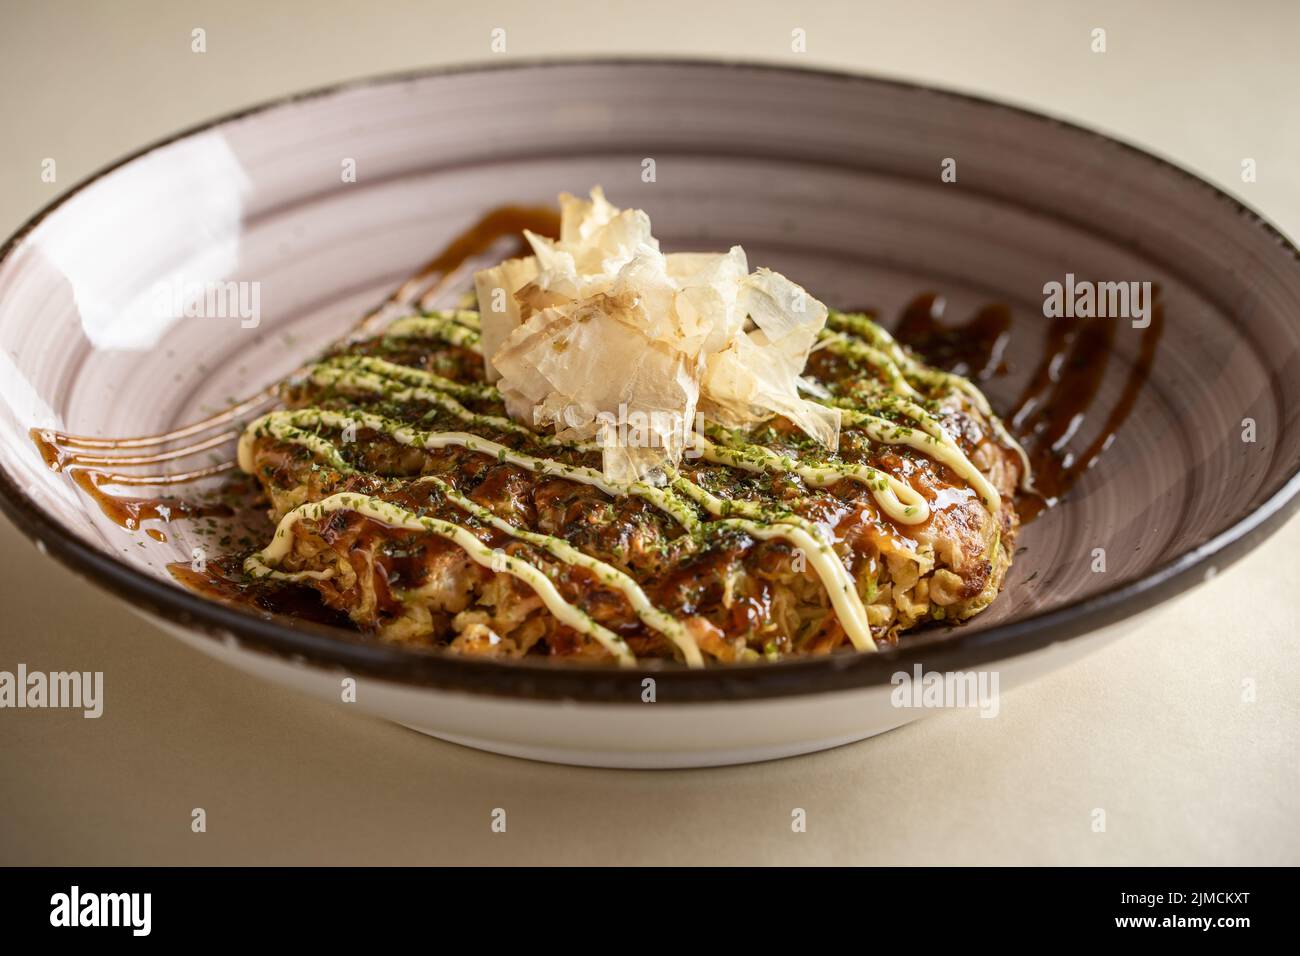 From above of tasty traditional Japanese okonomiyaki dish with sauce topped with bonito flakes served in ceramic bowl on light background Stock Photo